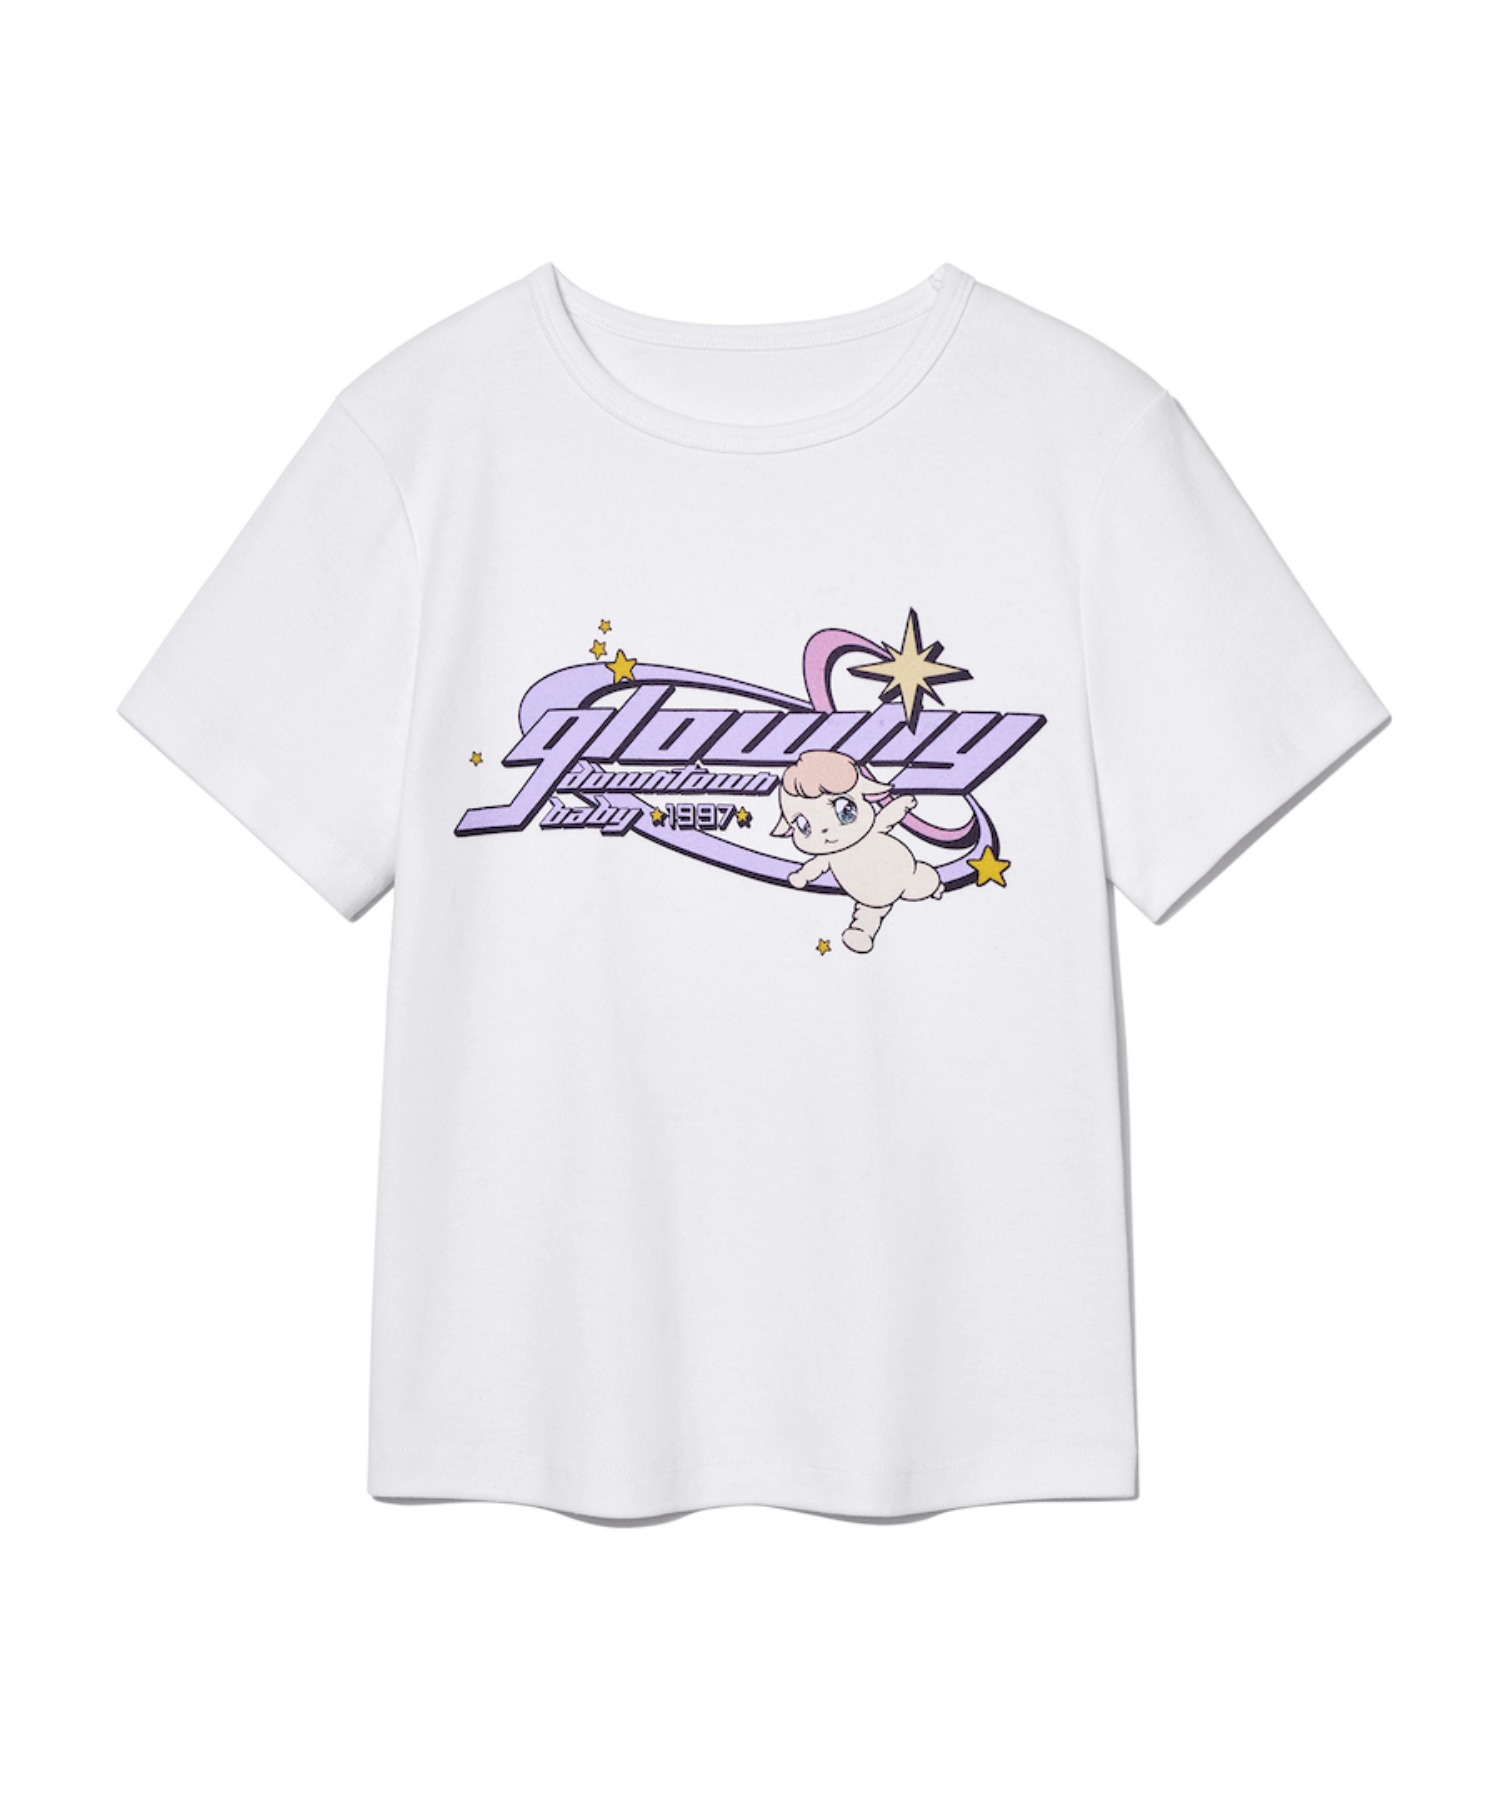 DOWNTOWN BABY TEE ver.2 (LAVENDER)